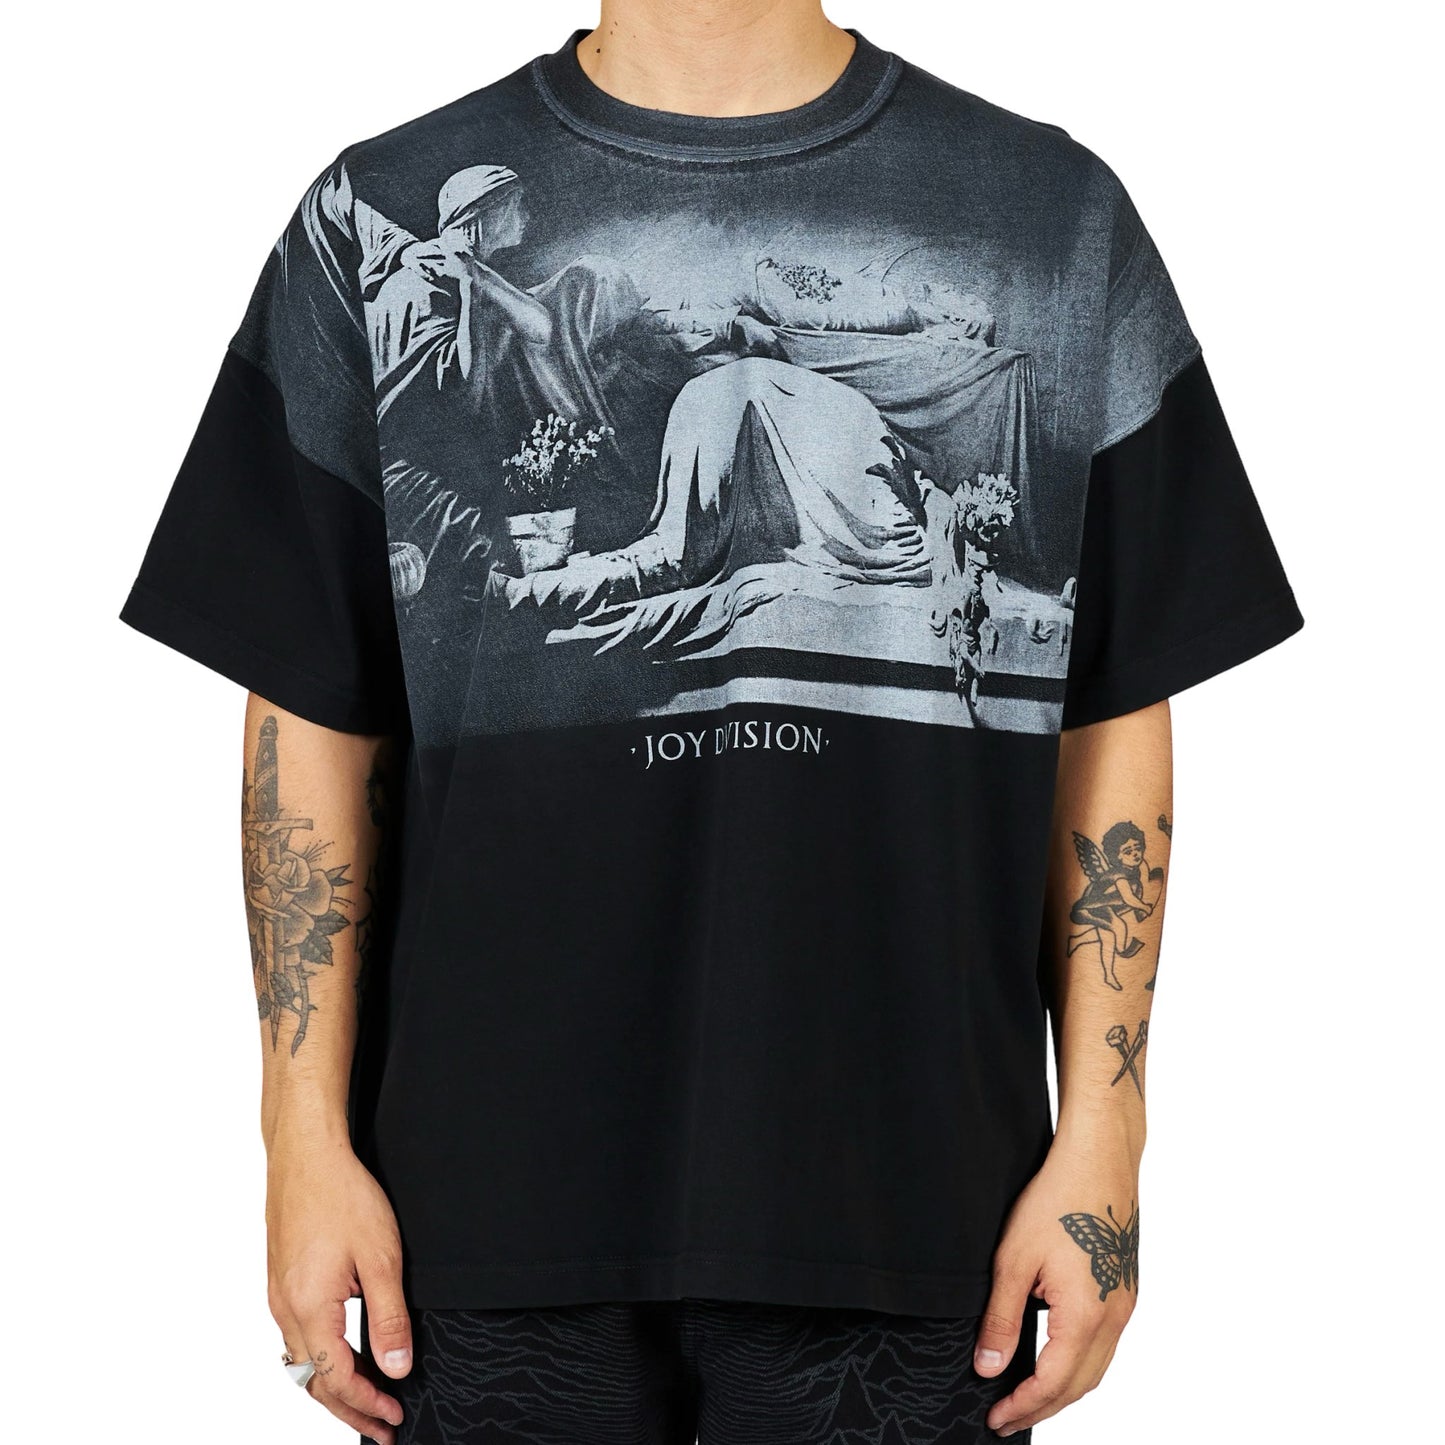 Man wearing a black t-shirt with an oversized plastisol print depicting a vintage scene and the text "Joy Division," an official collaboration with PLEASURES.